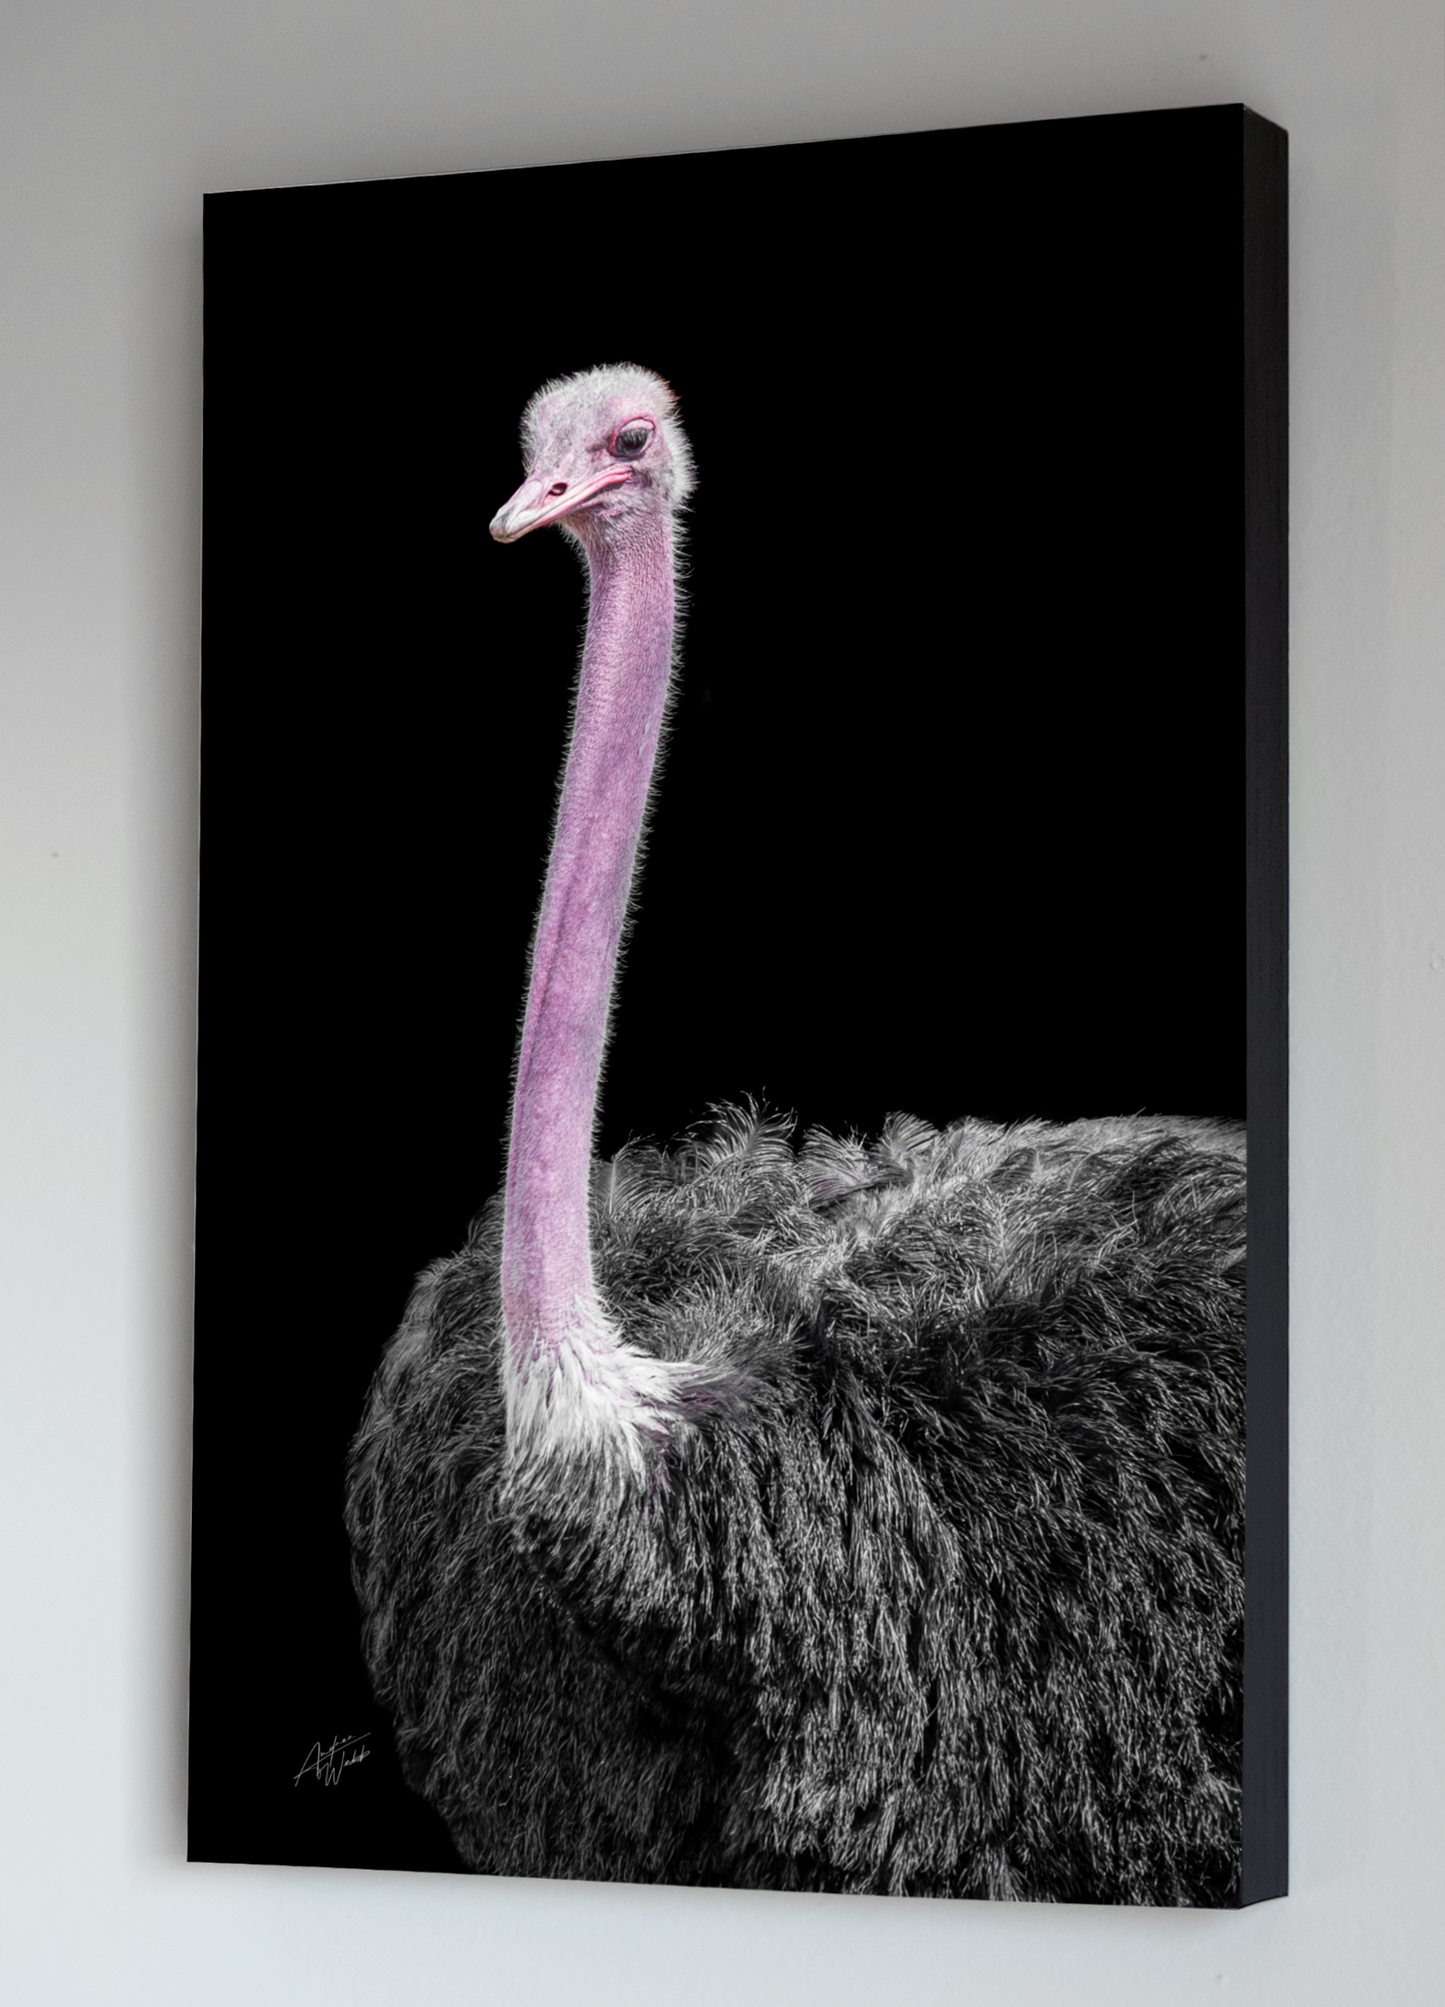 Ostrich face and partial body on a black background fine art portrait as living room decor. Ostrich photography. Ostrich art. Ostrich prints. Ostrich canvases. Ostrich wall art. Ostrich gifts. Animal Photography